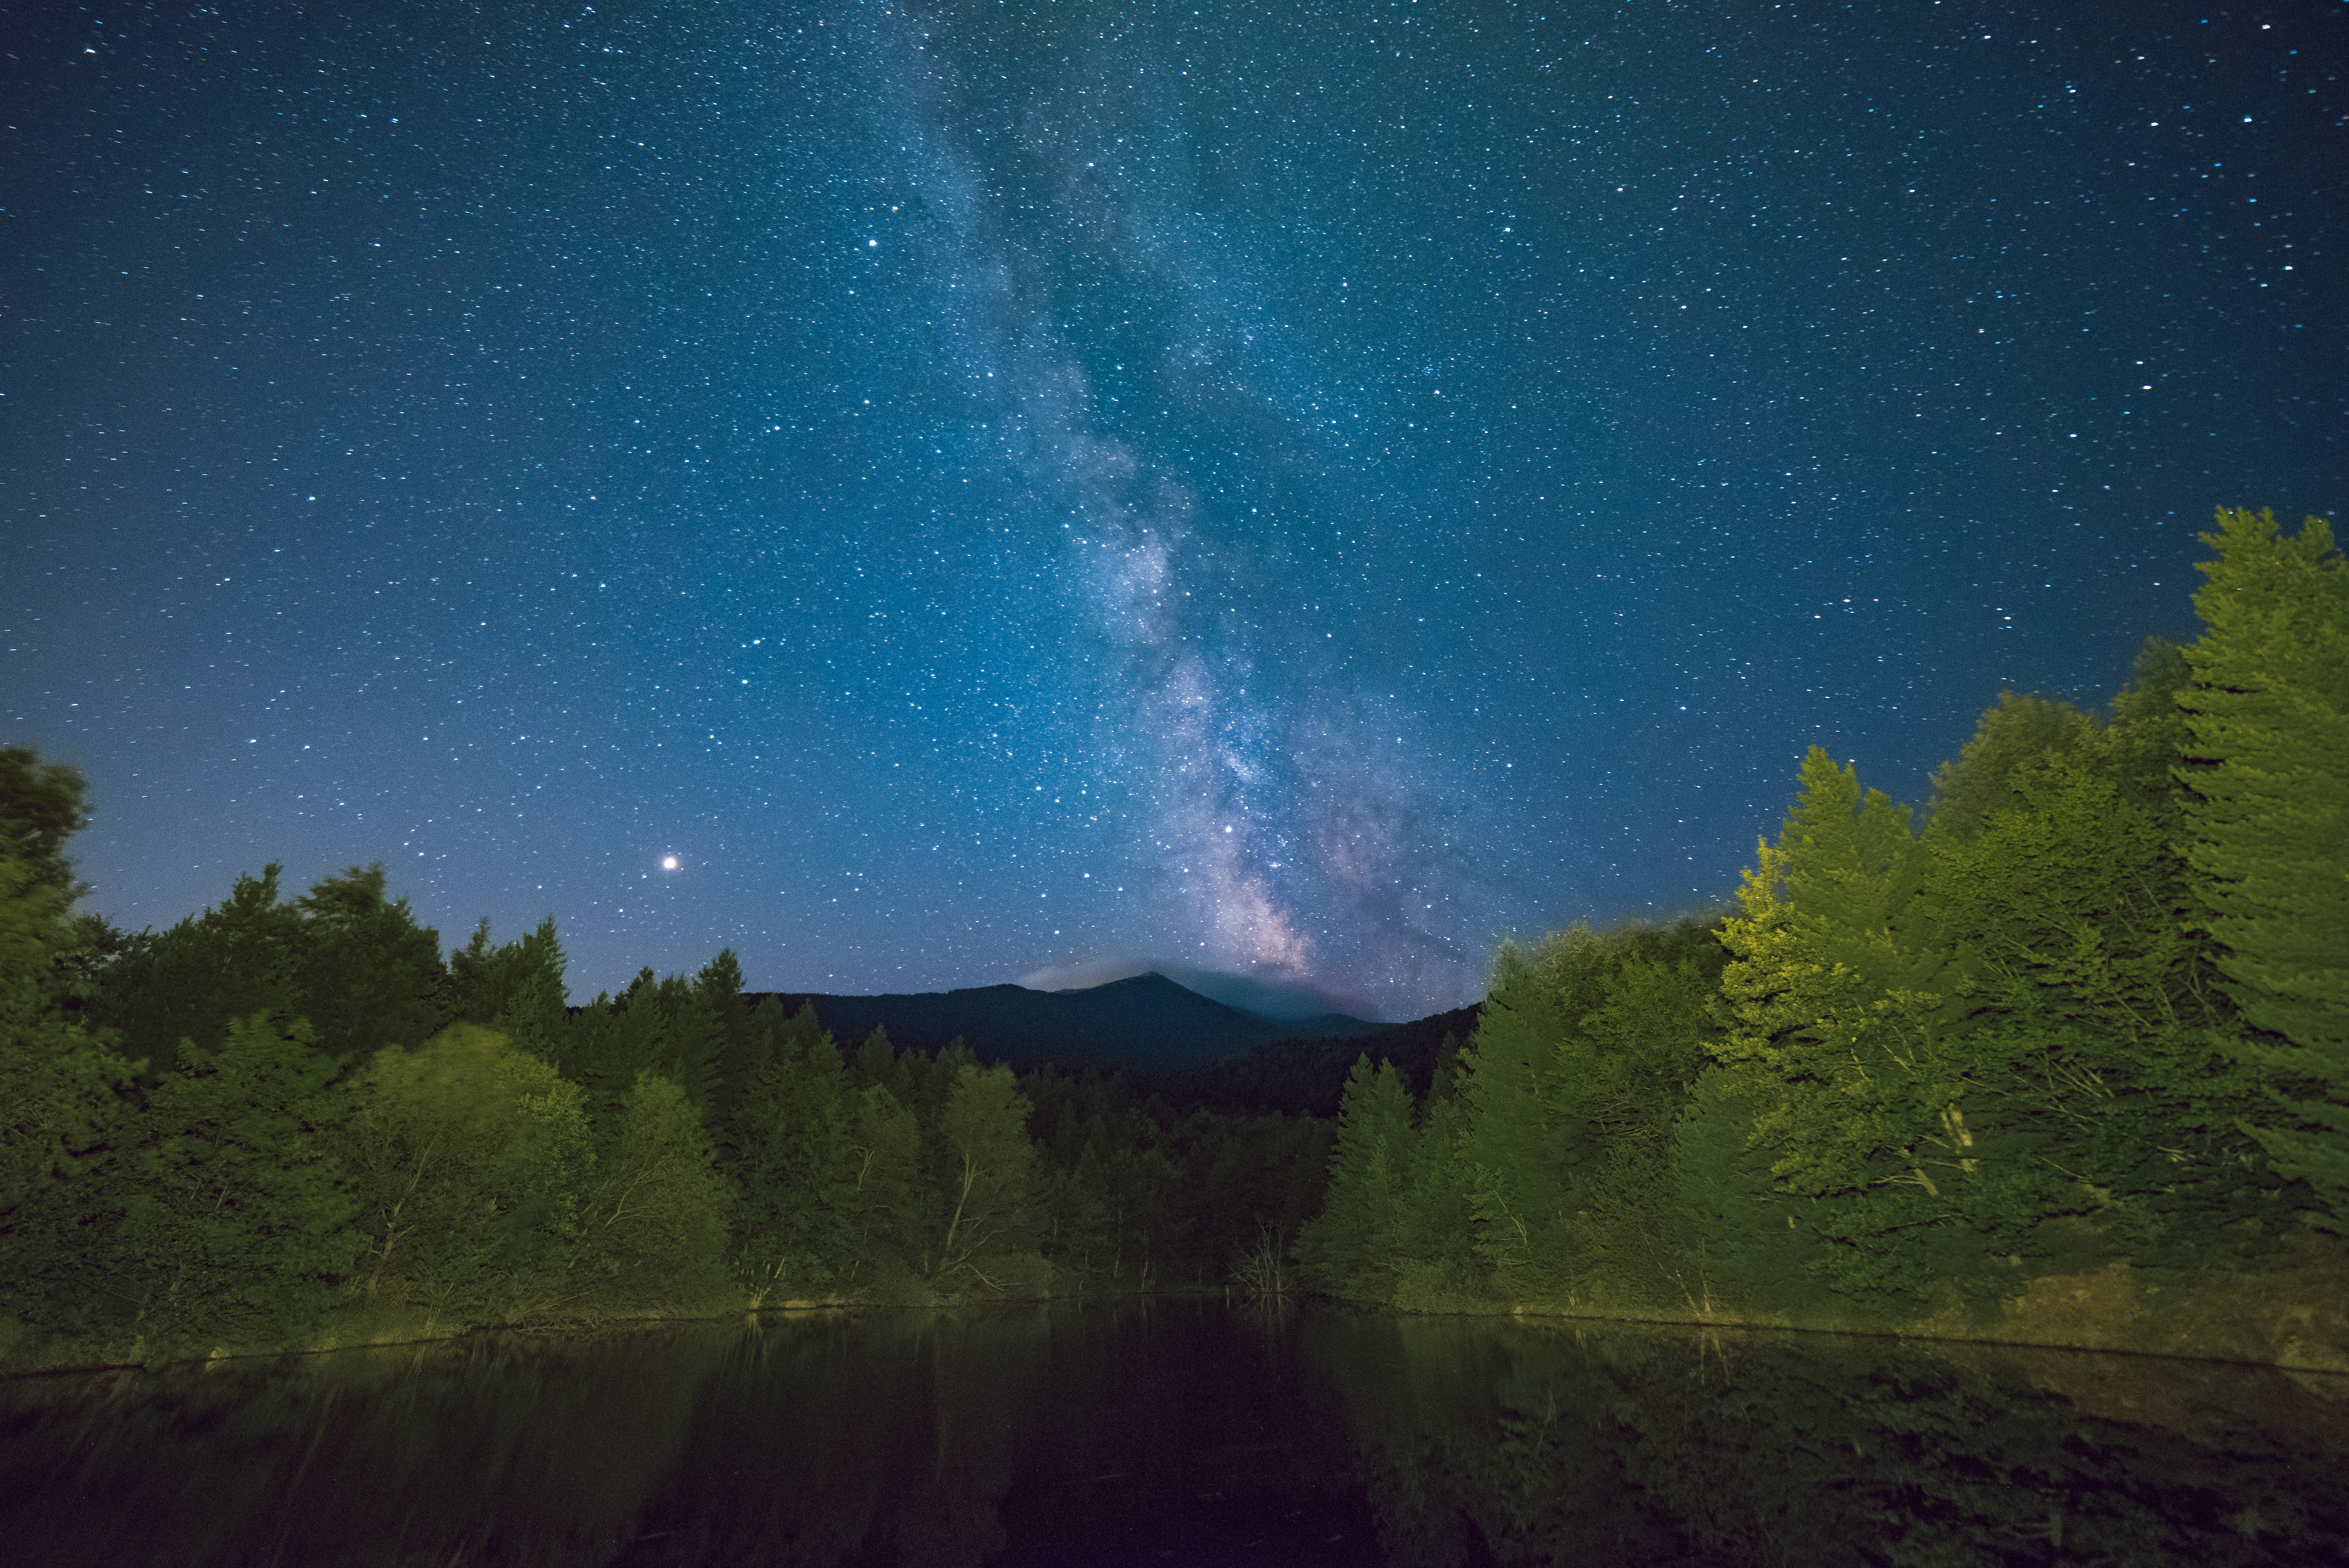 Forest Milky Way Night Reflection Over River Wallpapers